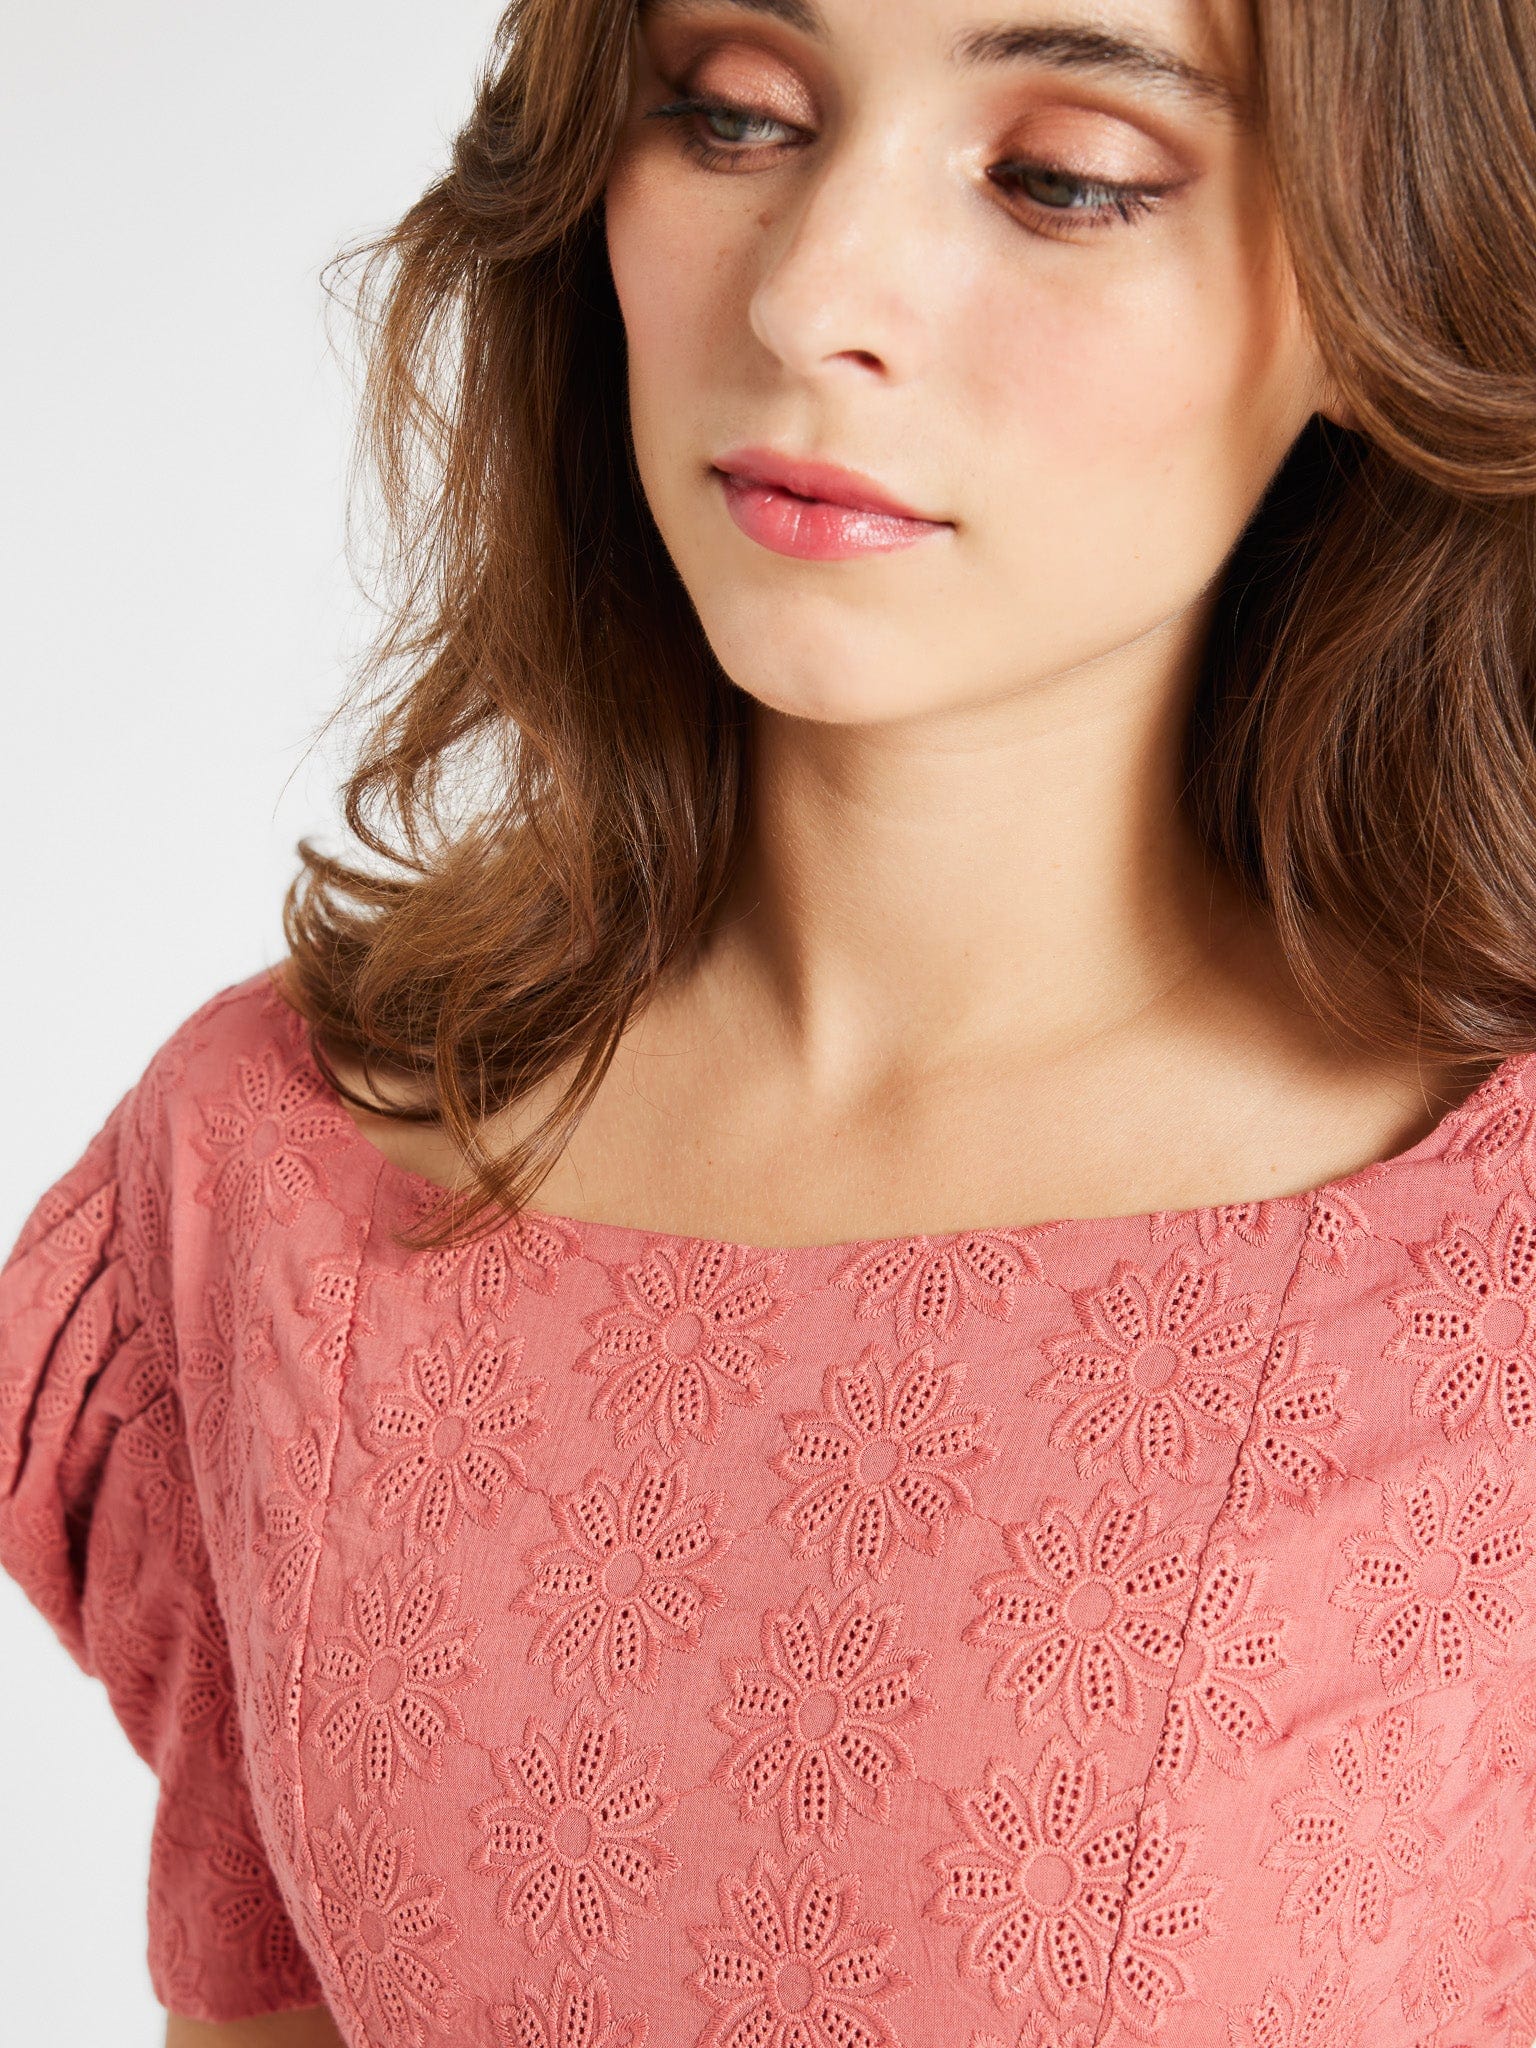 MILLE Clothing Coco Top in Rosewood Eyelet